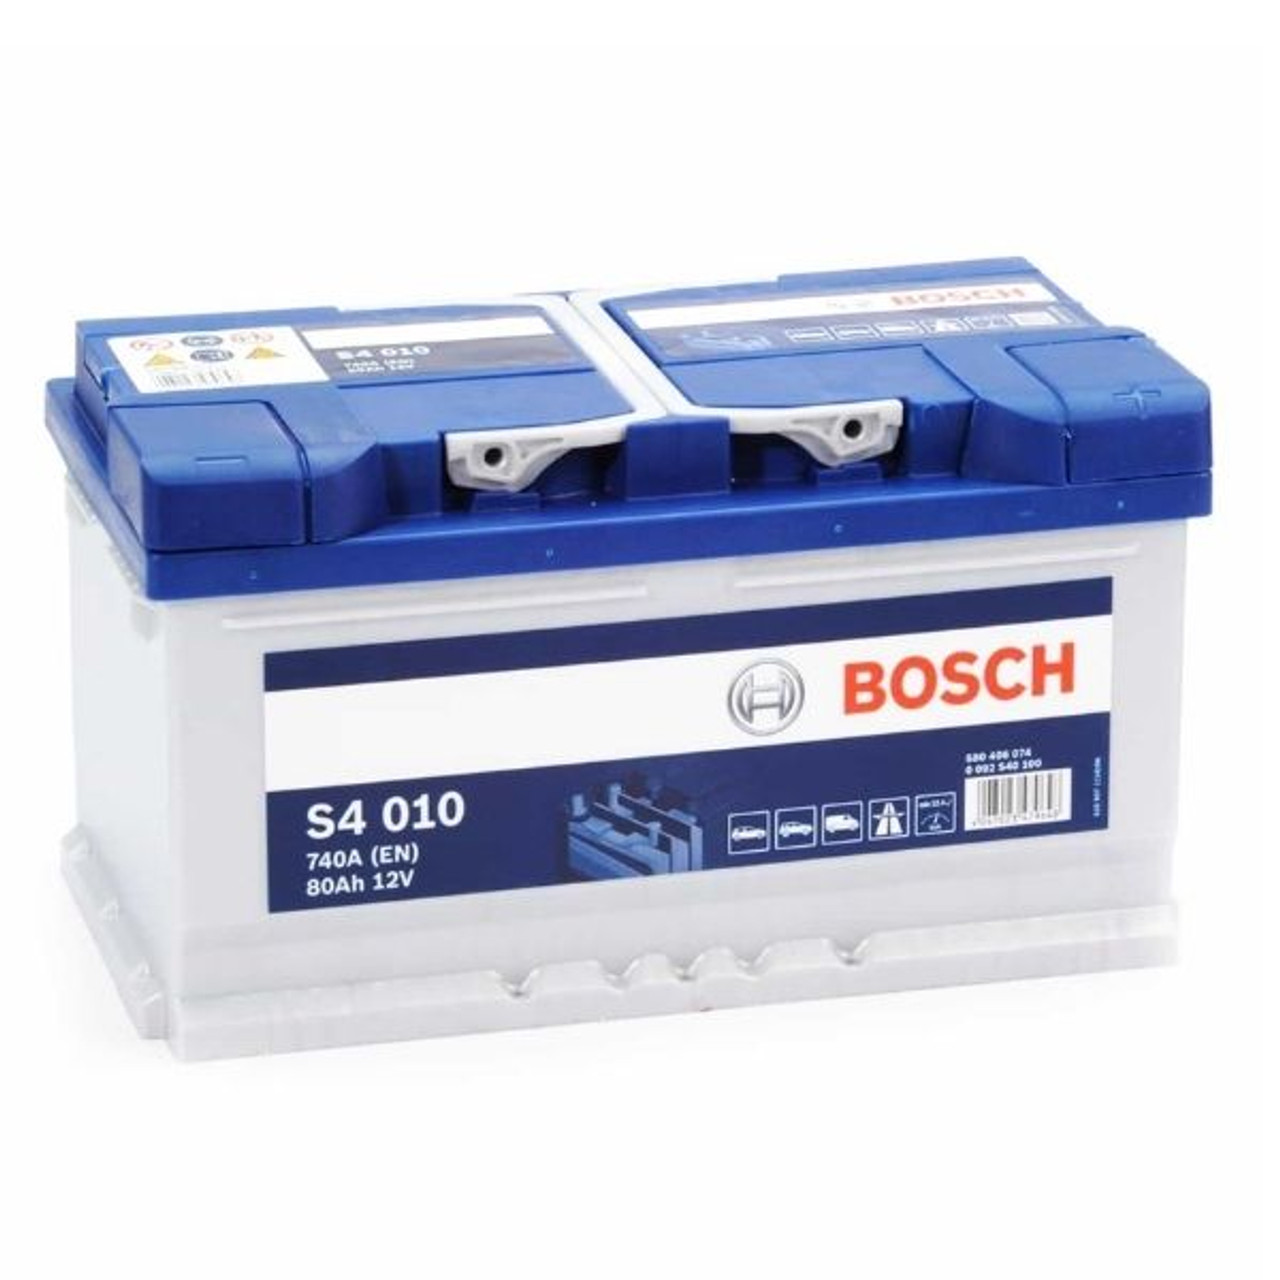 Bosch S4 Car Battery with PowerFrame® technology